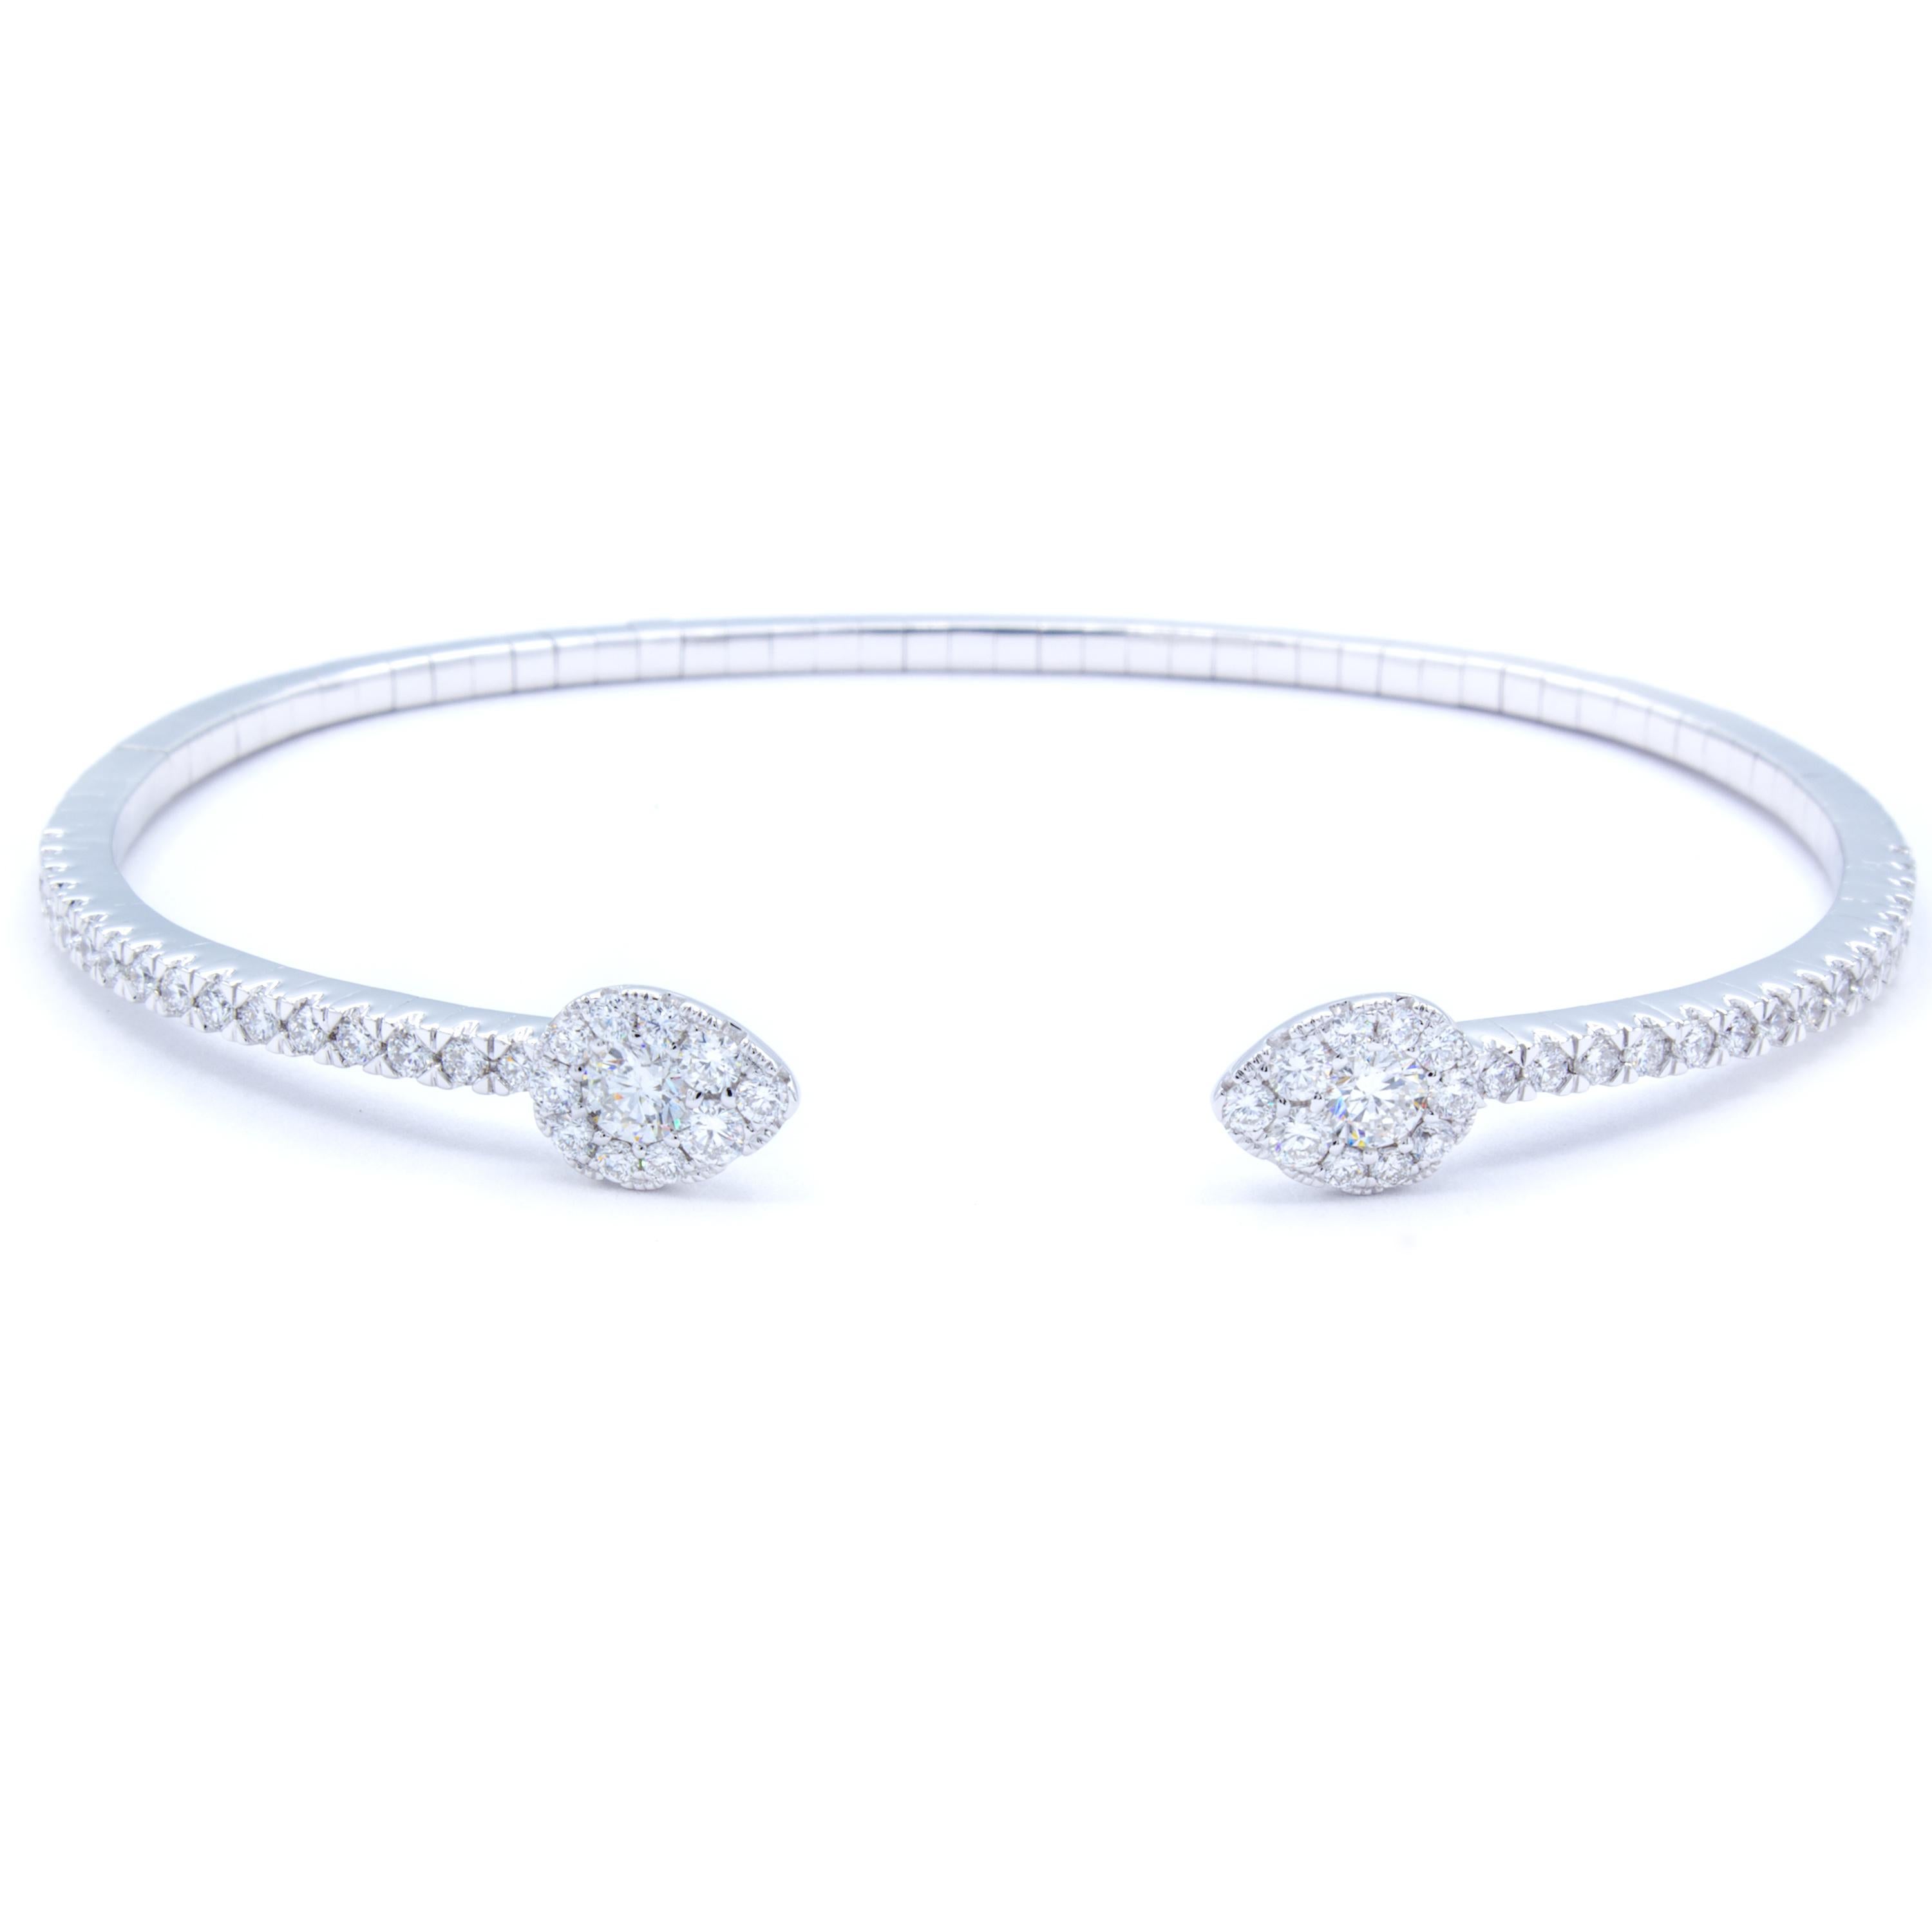 Delightfully bright 18Kt white gold delicately wraps around the wrist in an open semi circle bangle bracelet. Across the bracelet, over a carat of glittering round brilliant diamonds cast a fiery display that culminates in two pear shaped diamond